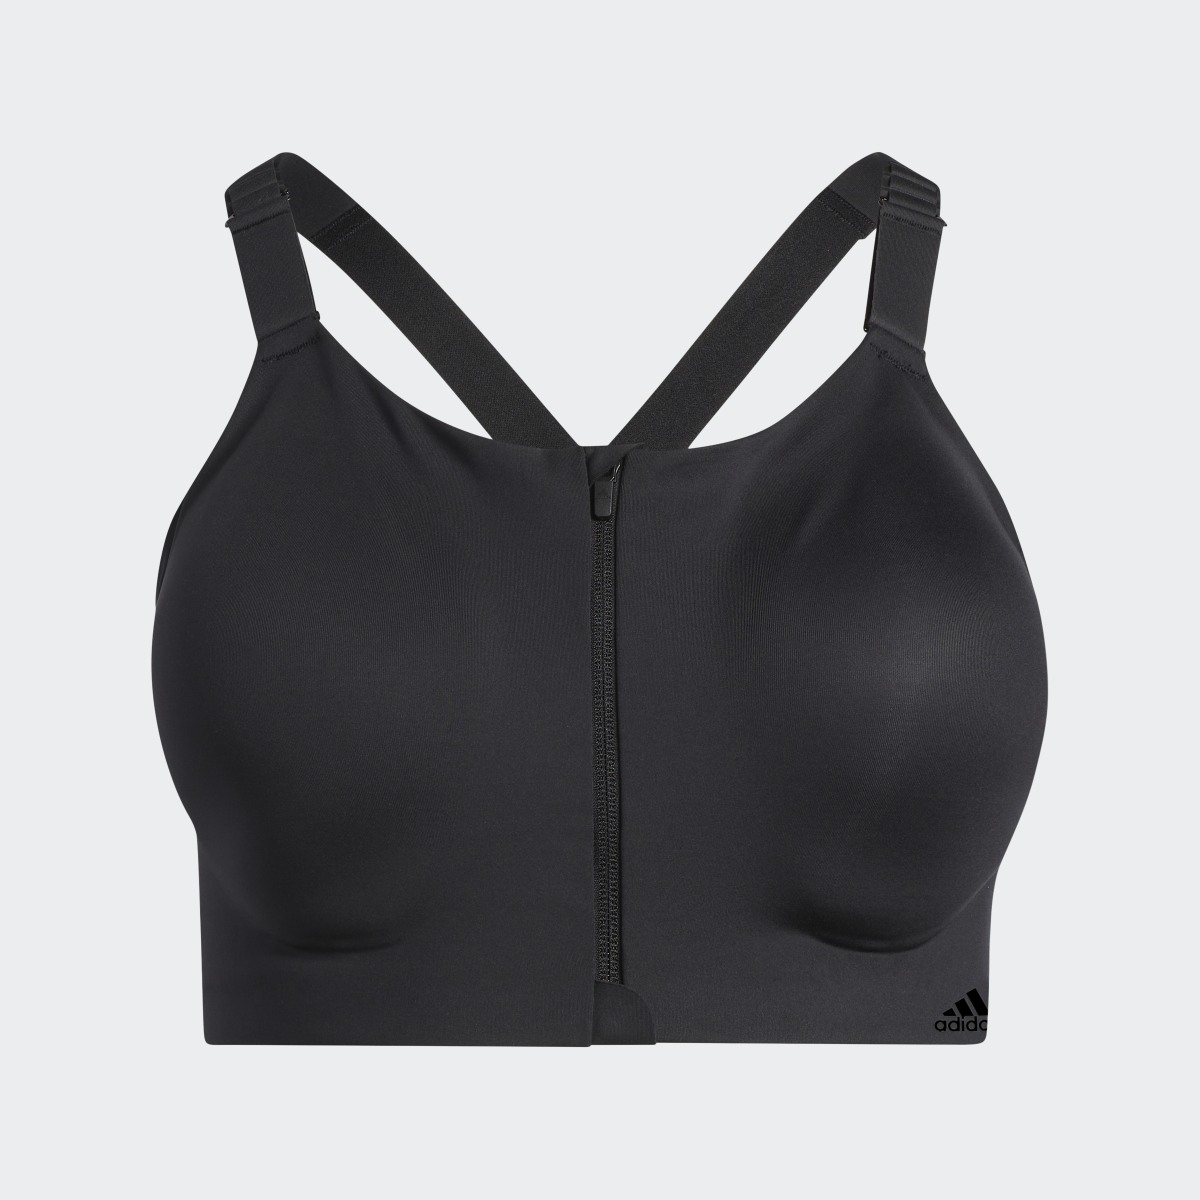 Adidas Brassière adidas TLRD Impact Luxe Training Maintien fort (Grandes tailles). 5